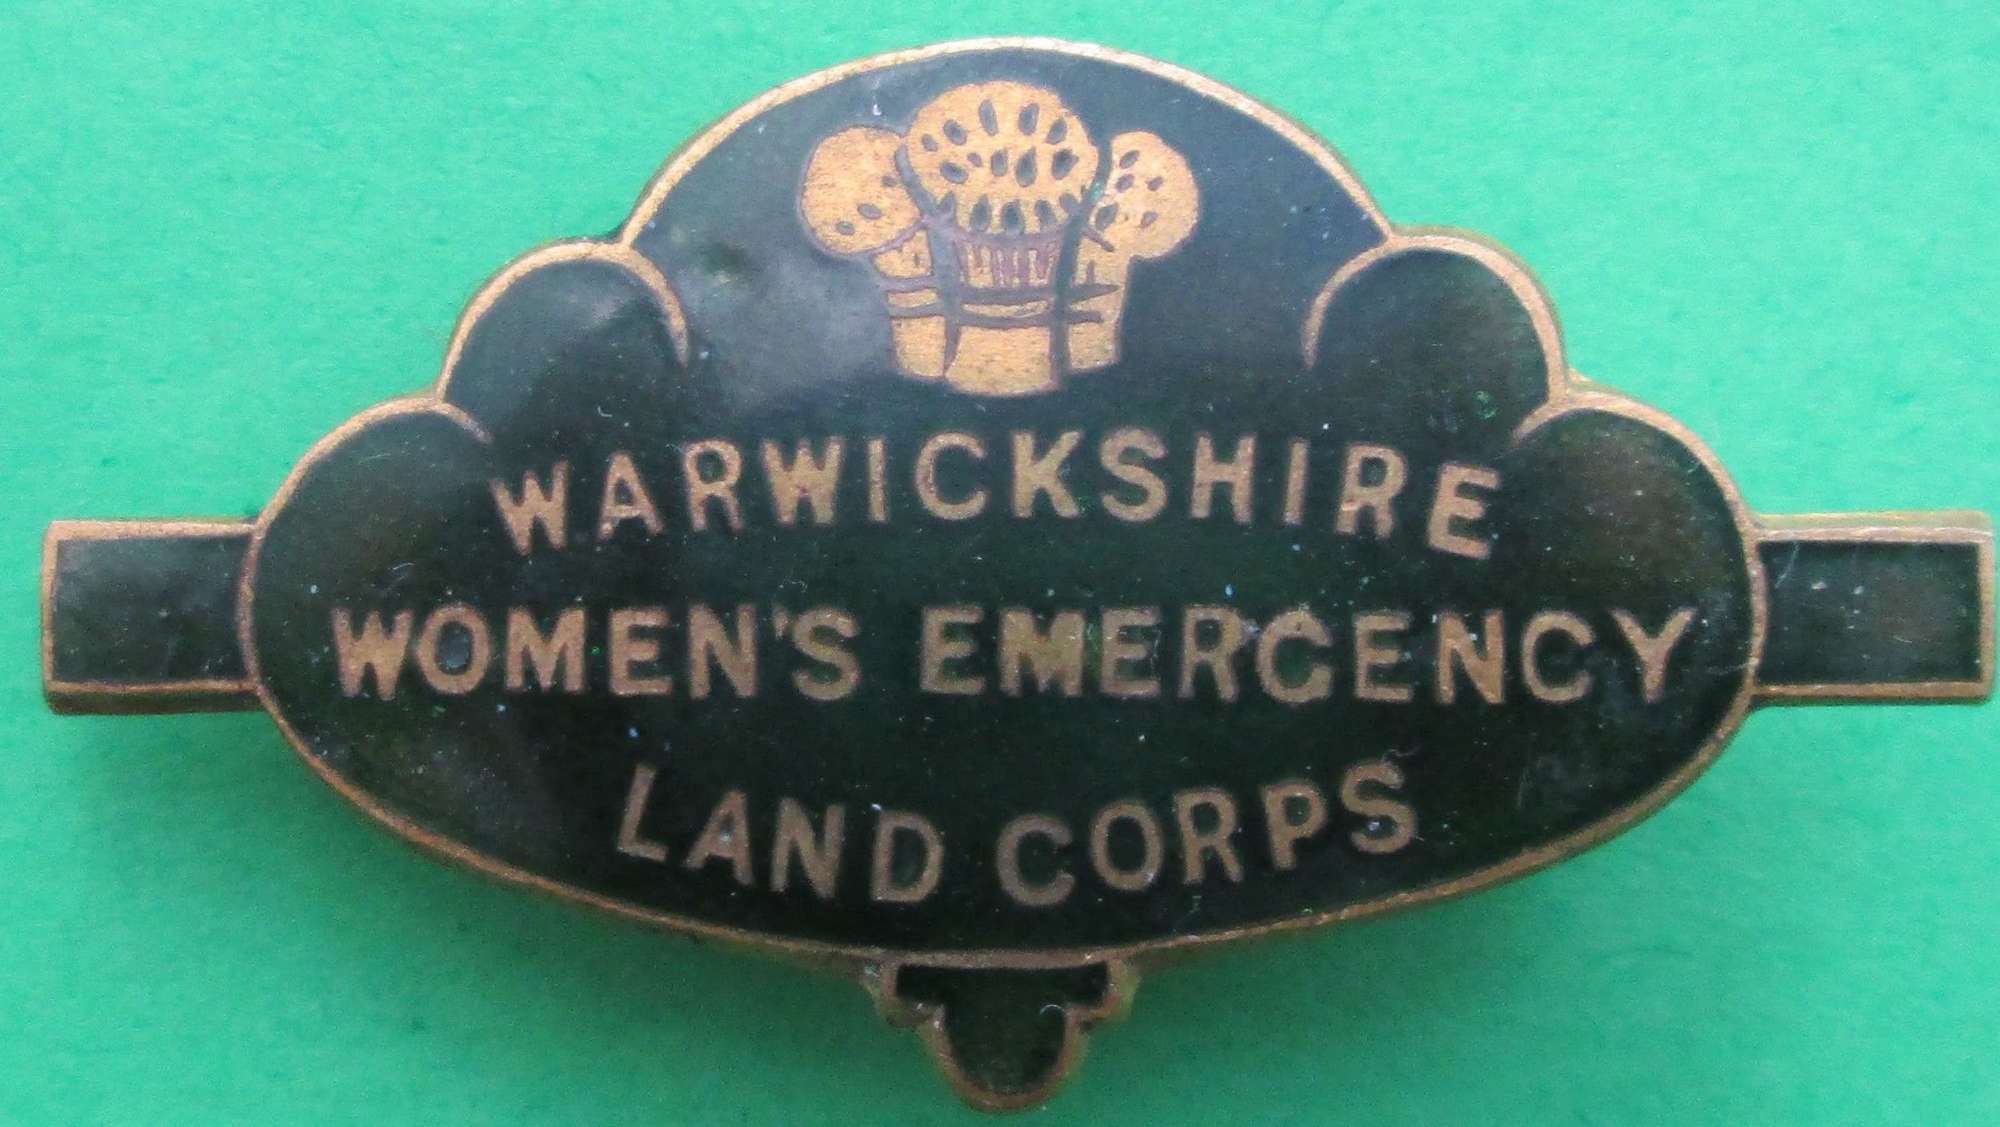 A WWII WARWICKSHIRE WOMENS EMERGENCY LAND CORPS PIN BADGE